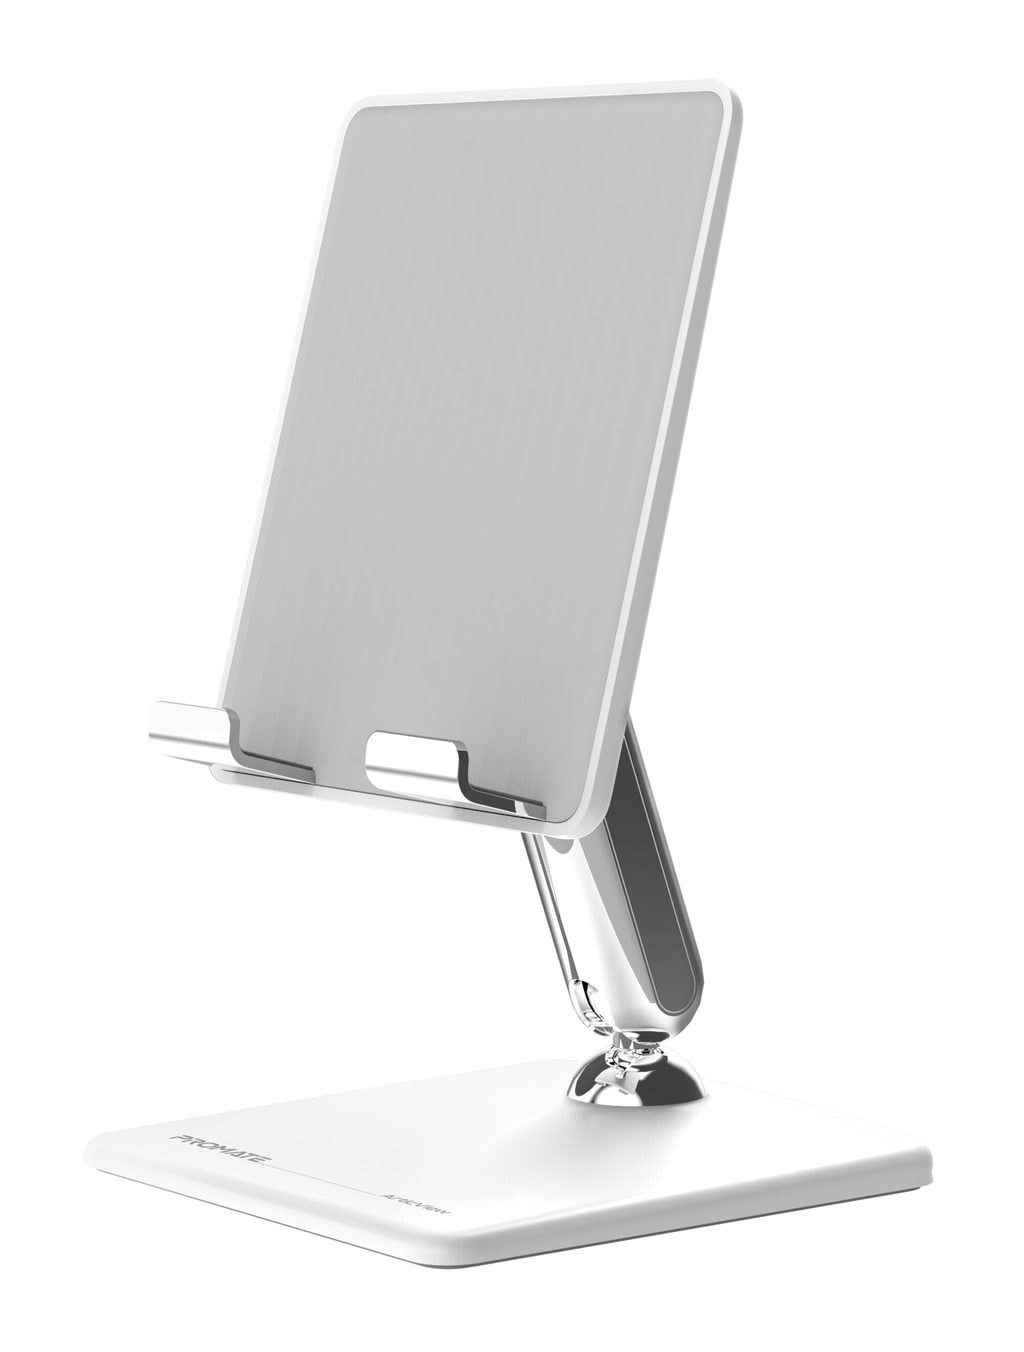 Promate Tablet Stand, Universal Multi-Angle Desk Tablet/Phone Holder with Anti-Slip Base and Foldable Ergonomic Design for iPad Pro/Mini, Nintendo Switch, iPhone 12 Pro, Galaxy 21, Kindle, ArticView White